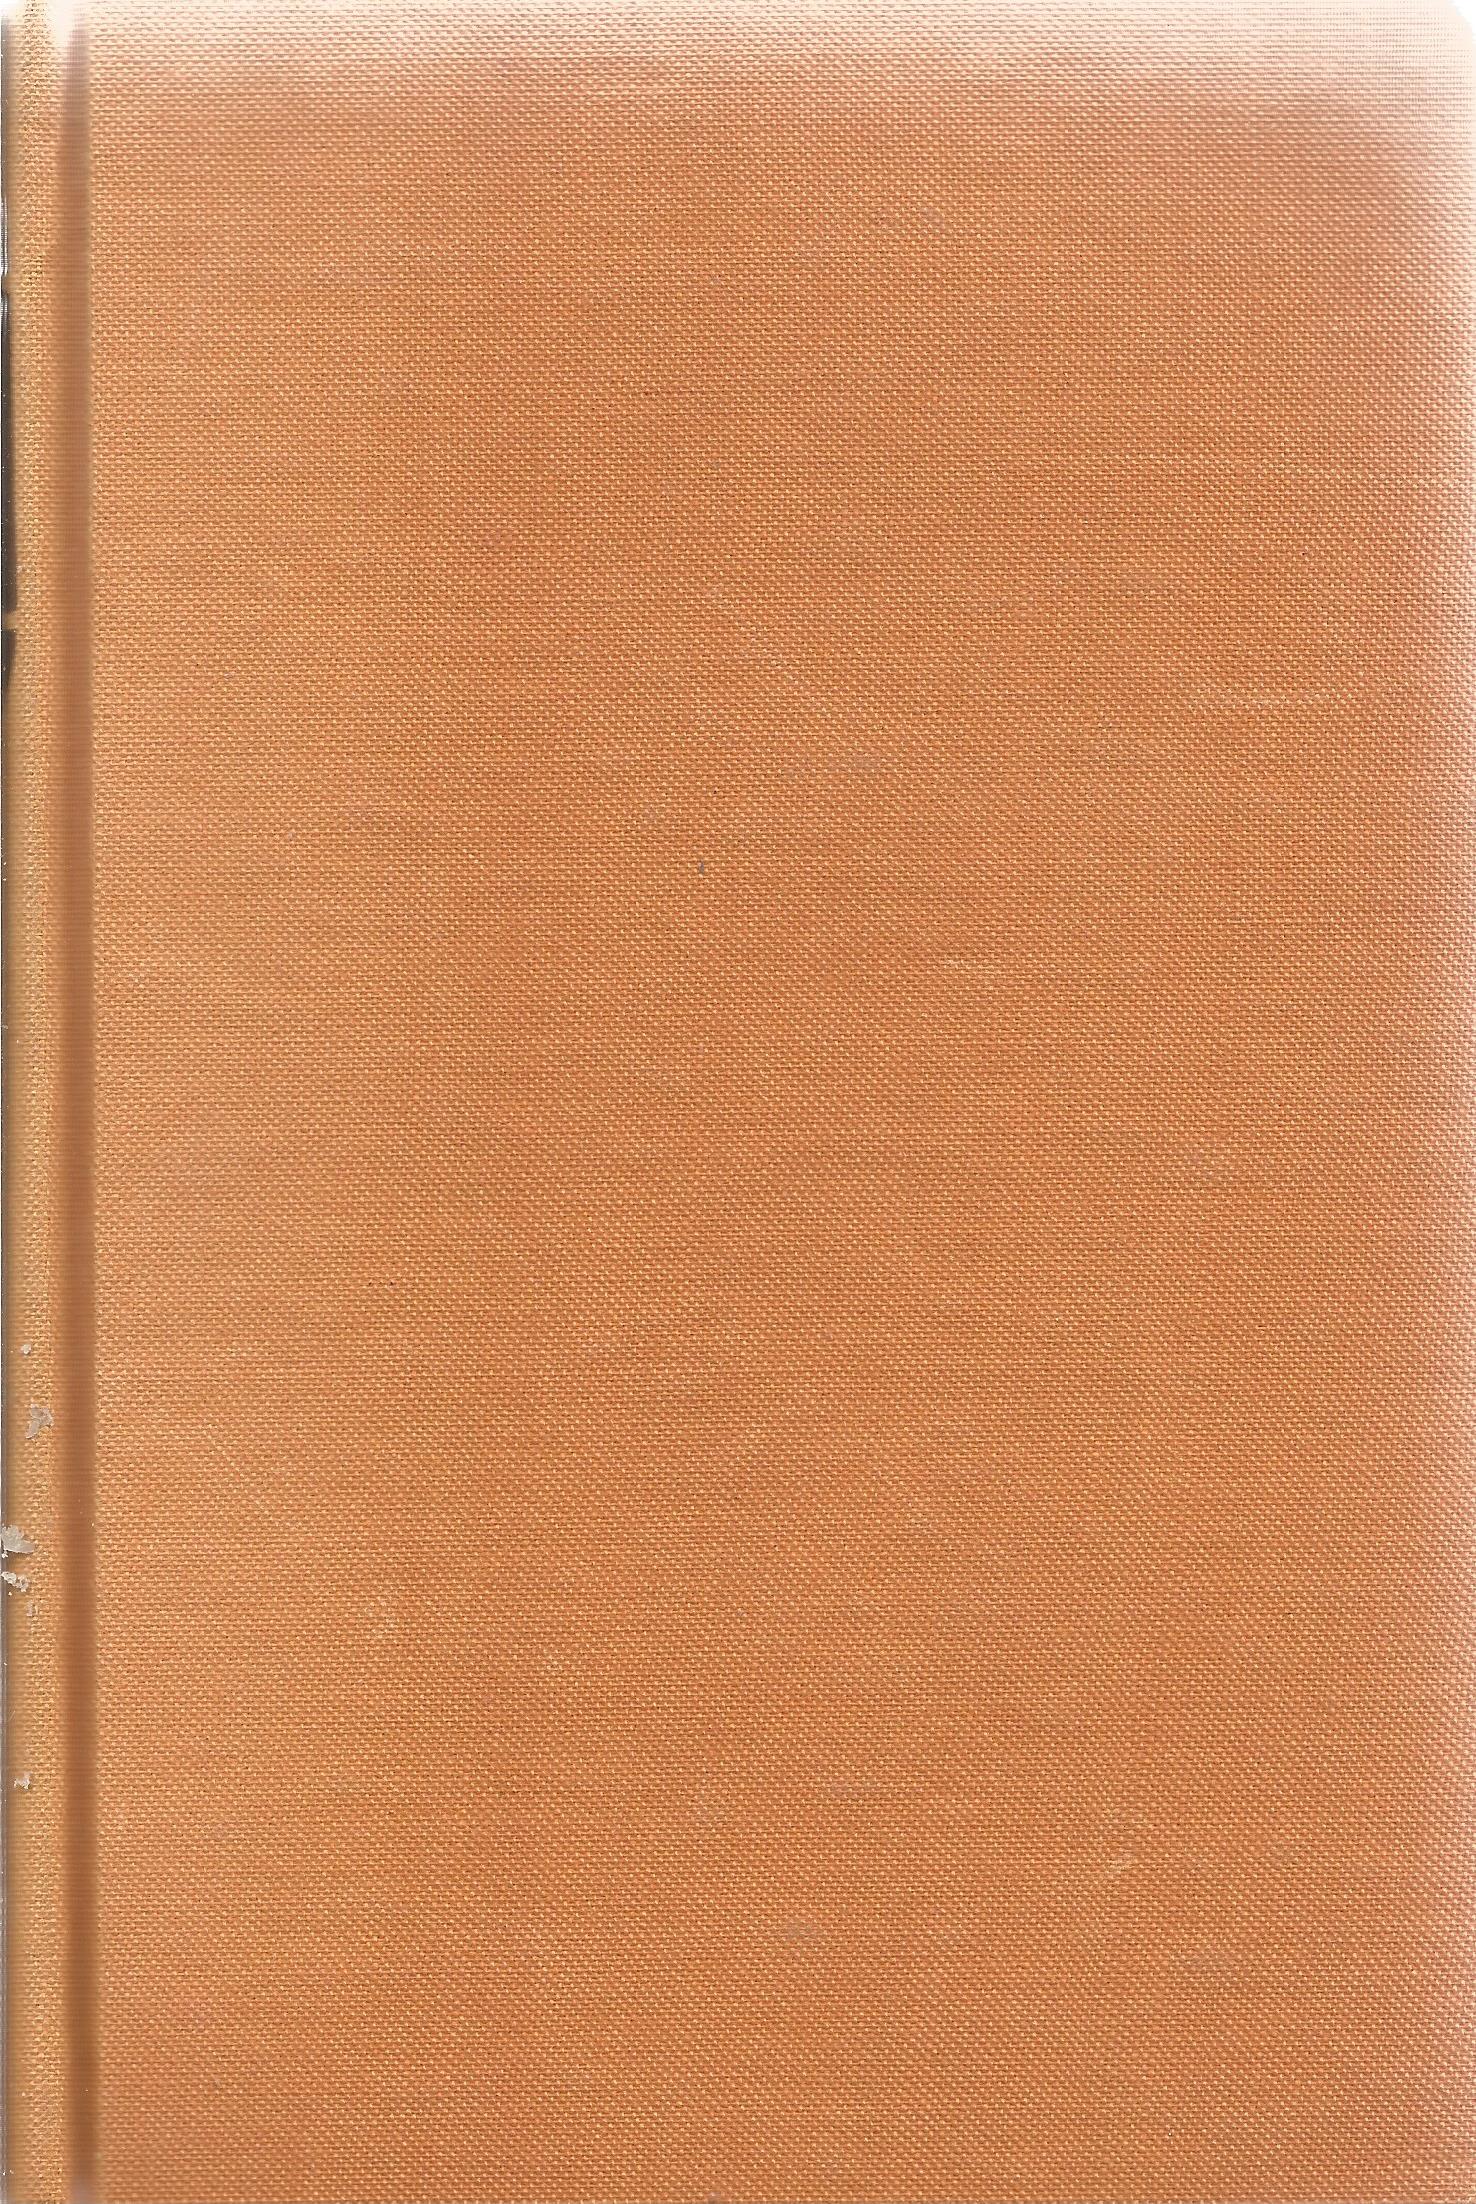 Ernest Gann hardback book Soldier of Fortune 1956 published by The Companion Book Club (Odhams Press